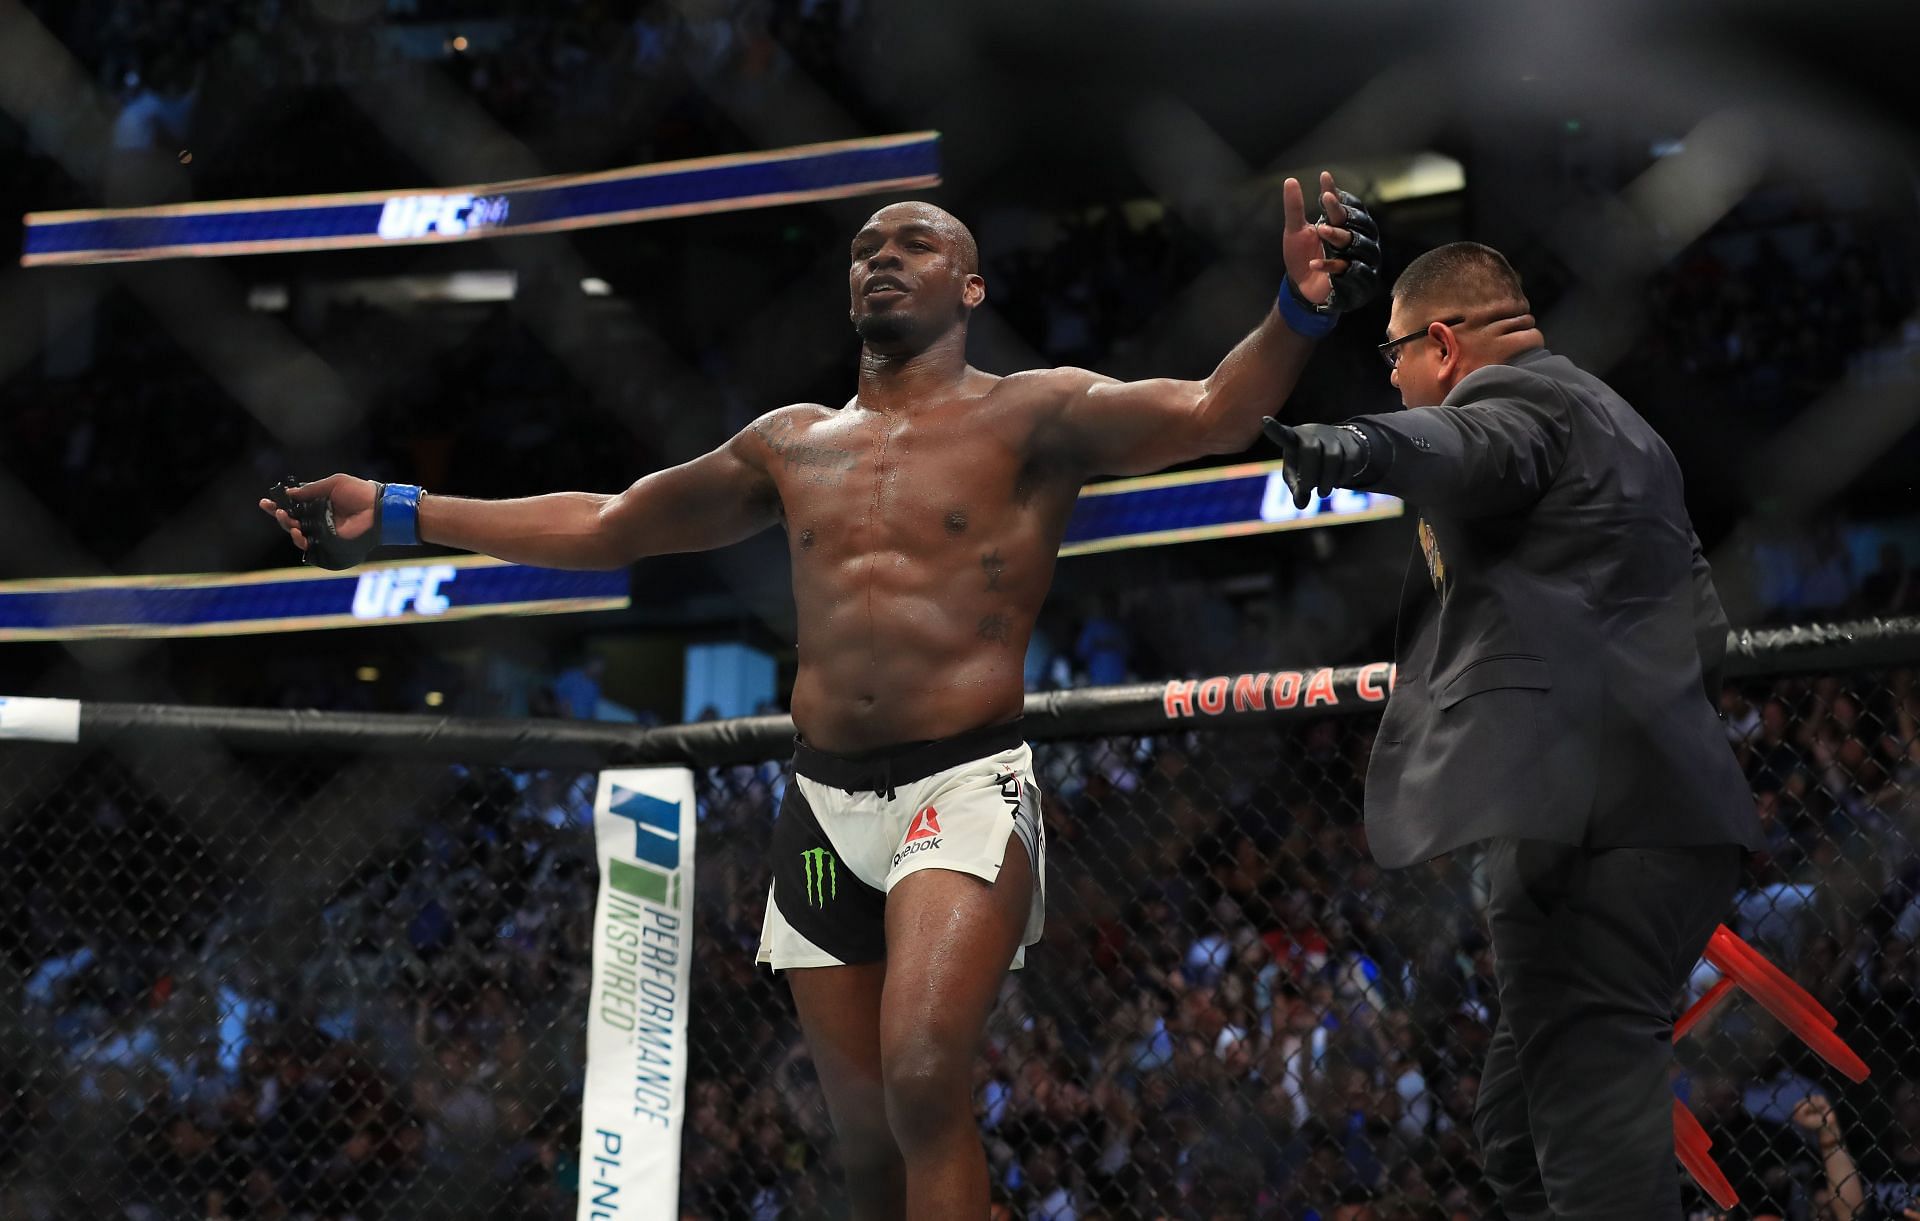 Jon Jones never failed to live up to his hype